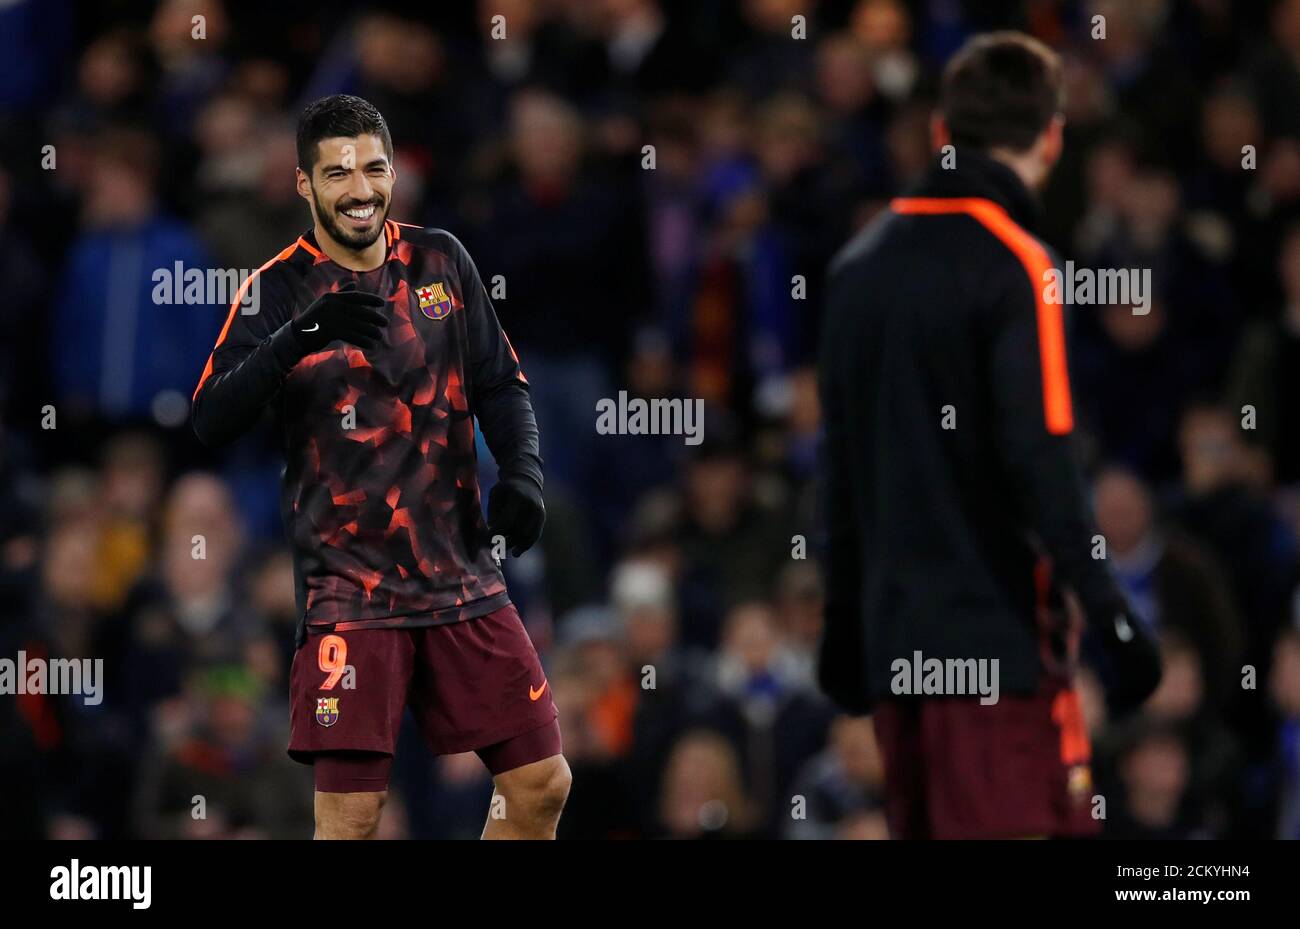 Soccer Football - Champions League Round of 16 First Leg - Chelsea vs FC Barcelona - Stamford Bridge, London, Britain - February 20, 2018   Barcelona’s Luis Suarez and Lionel Messi warm up before the match    REUTERS/Eddie Keogh Stock Photo